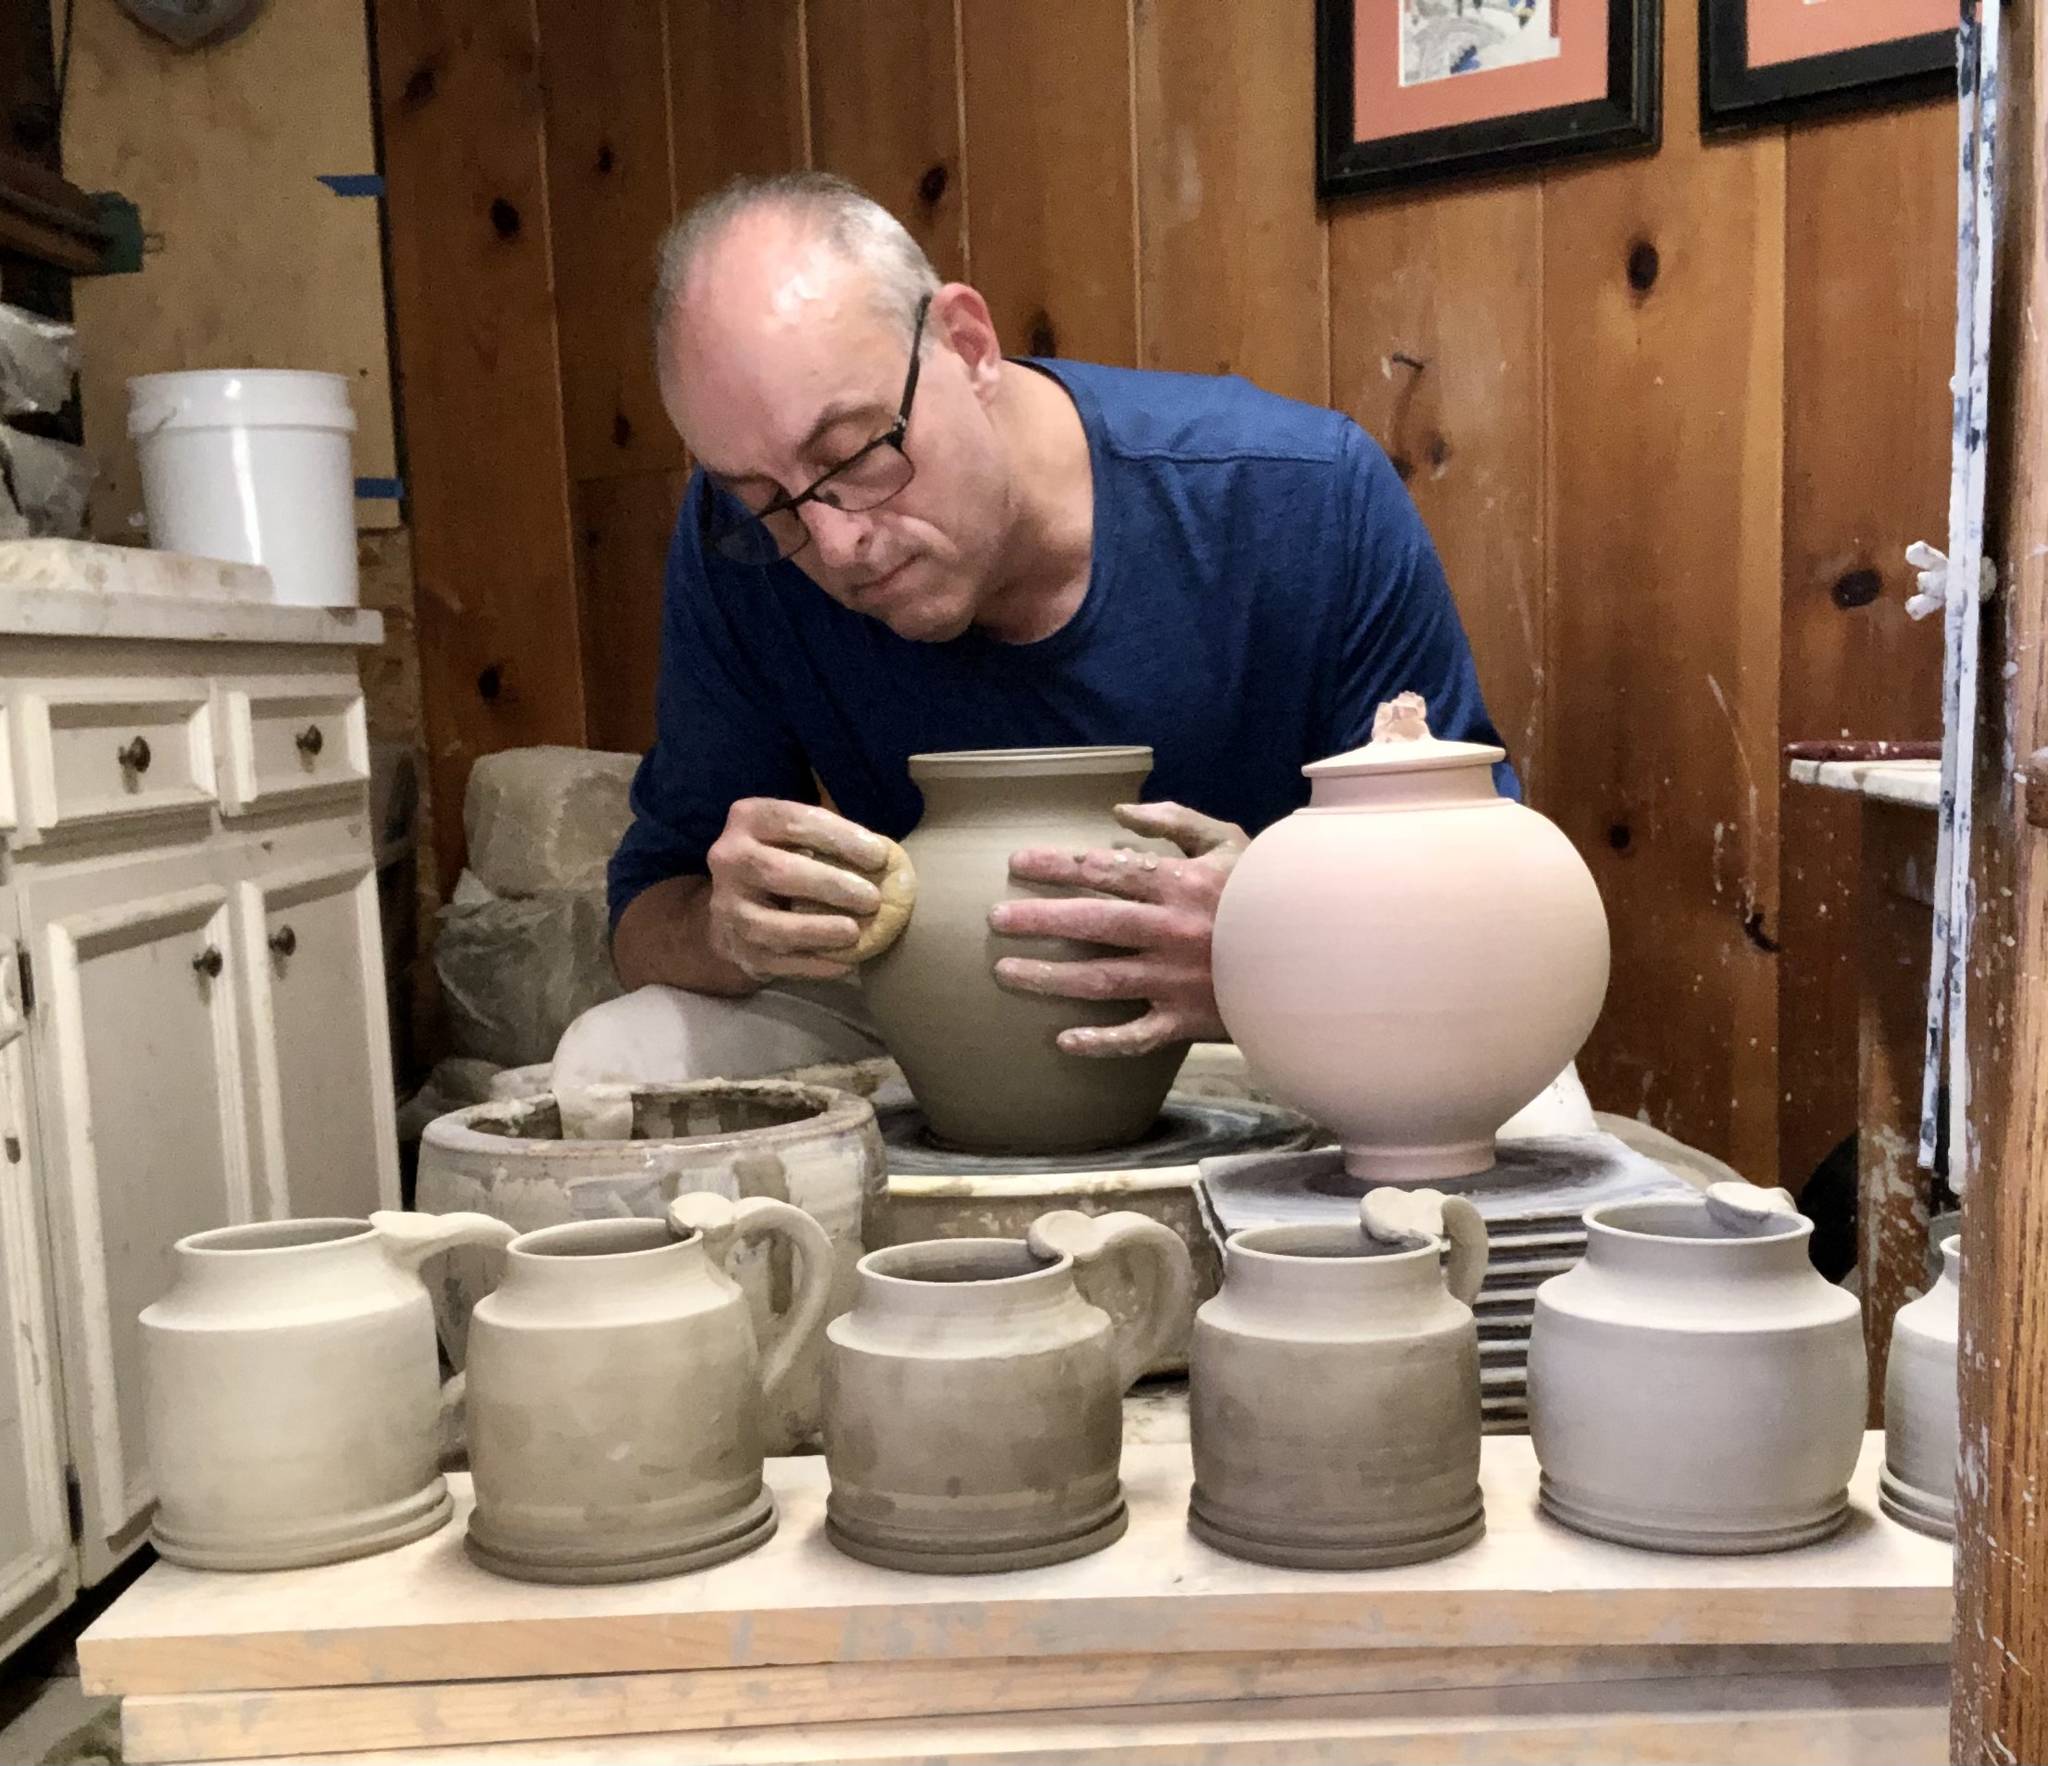 Photo provided
New member Charles LaFond works on a pottery creation at Freeland Art Studios.